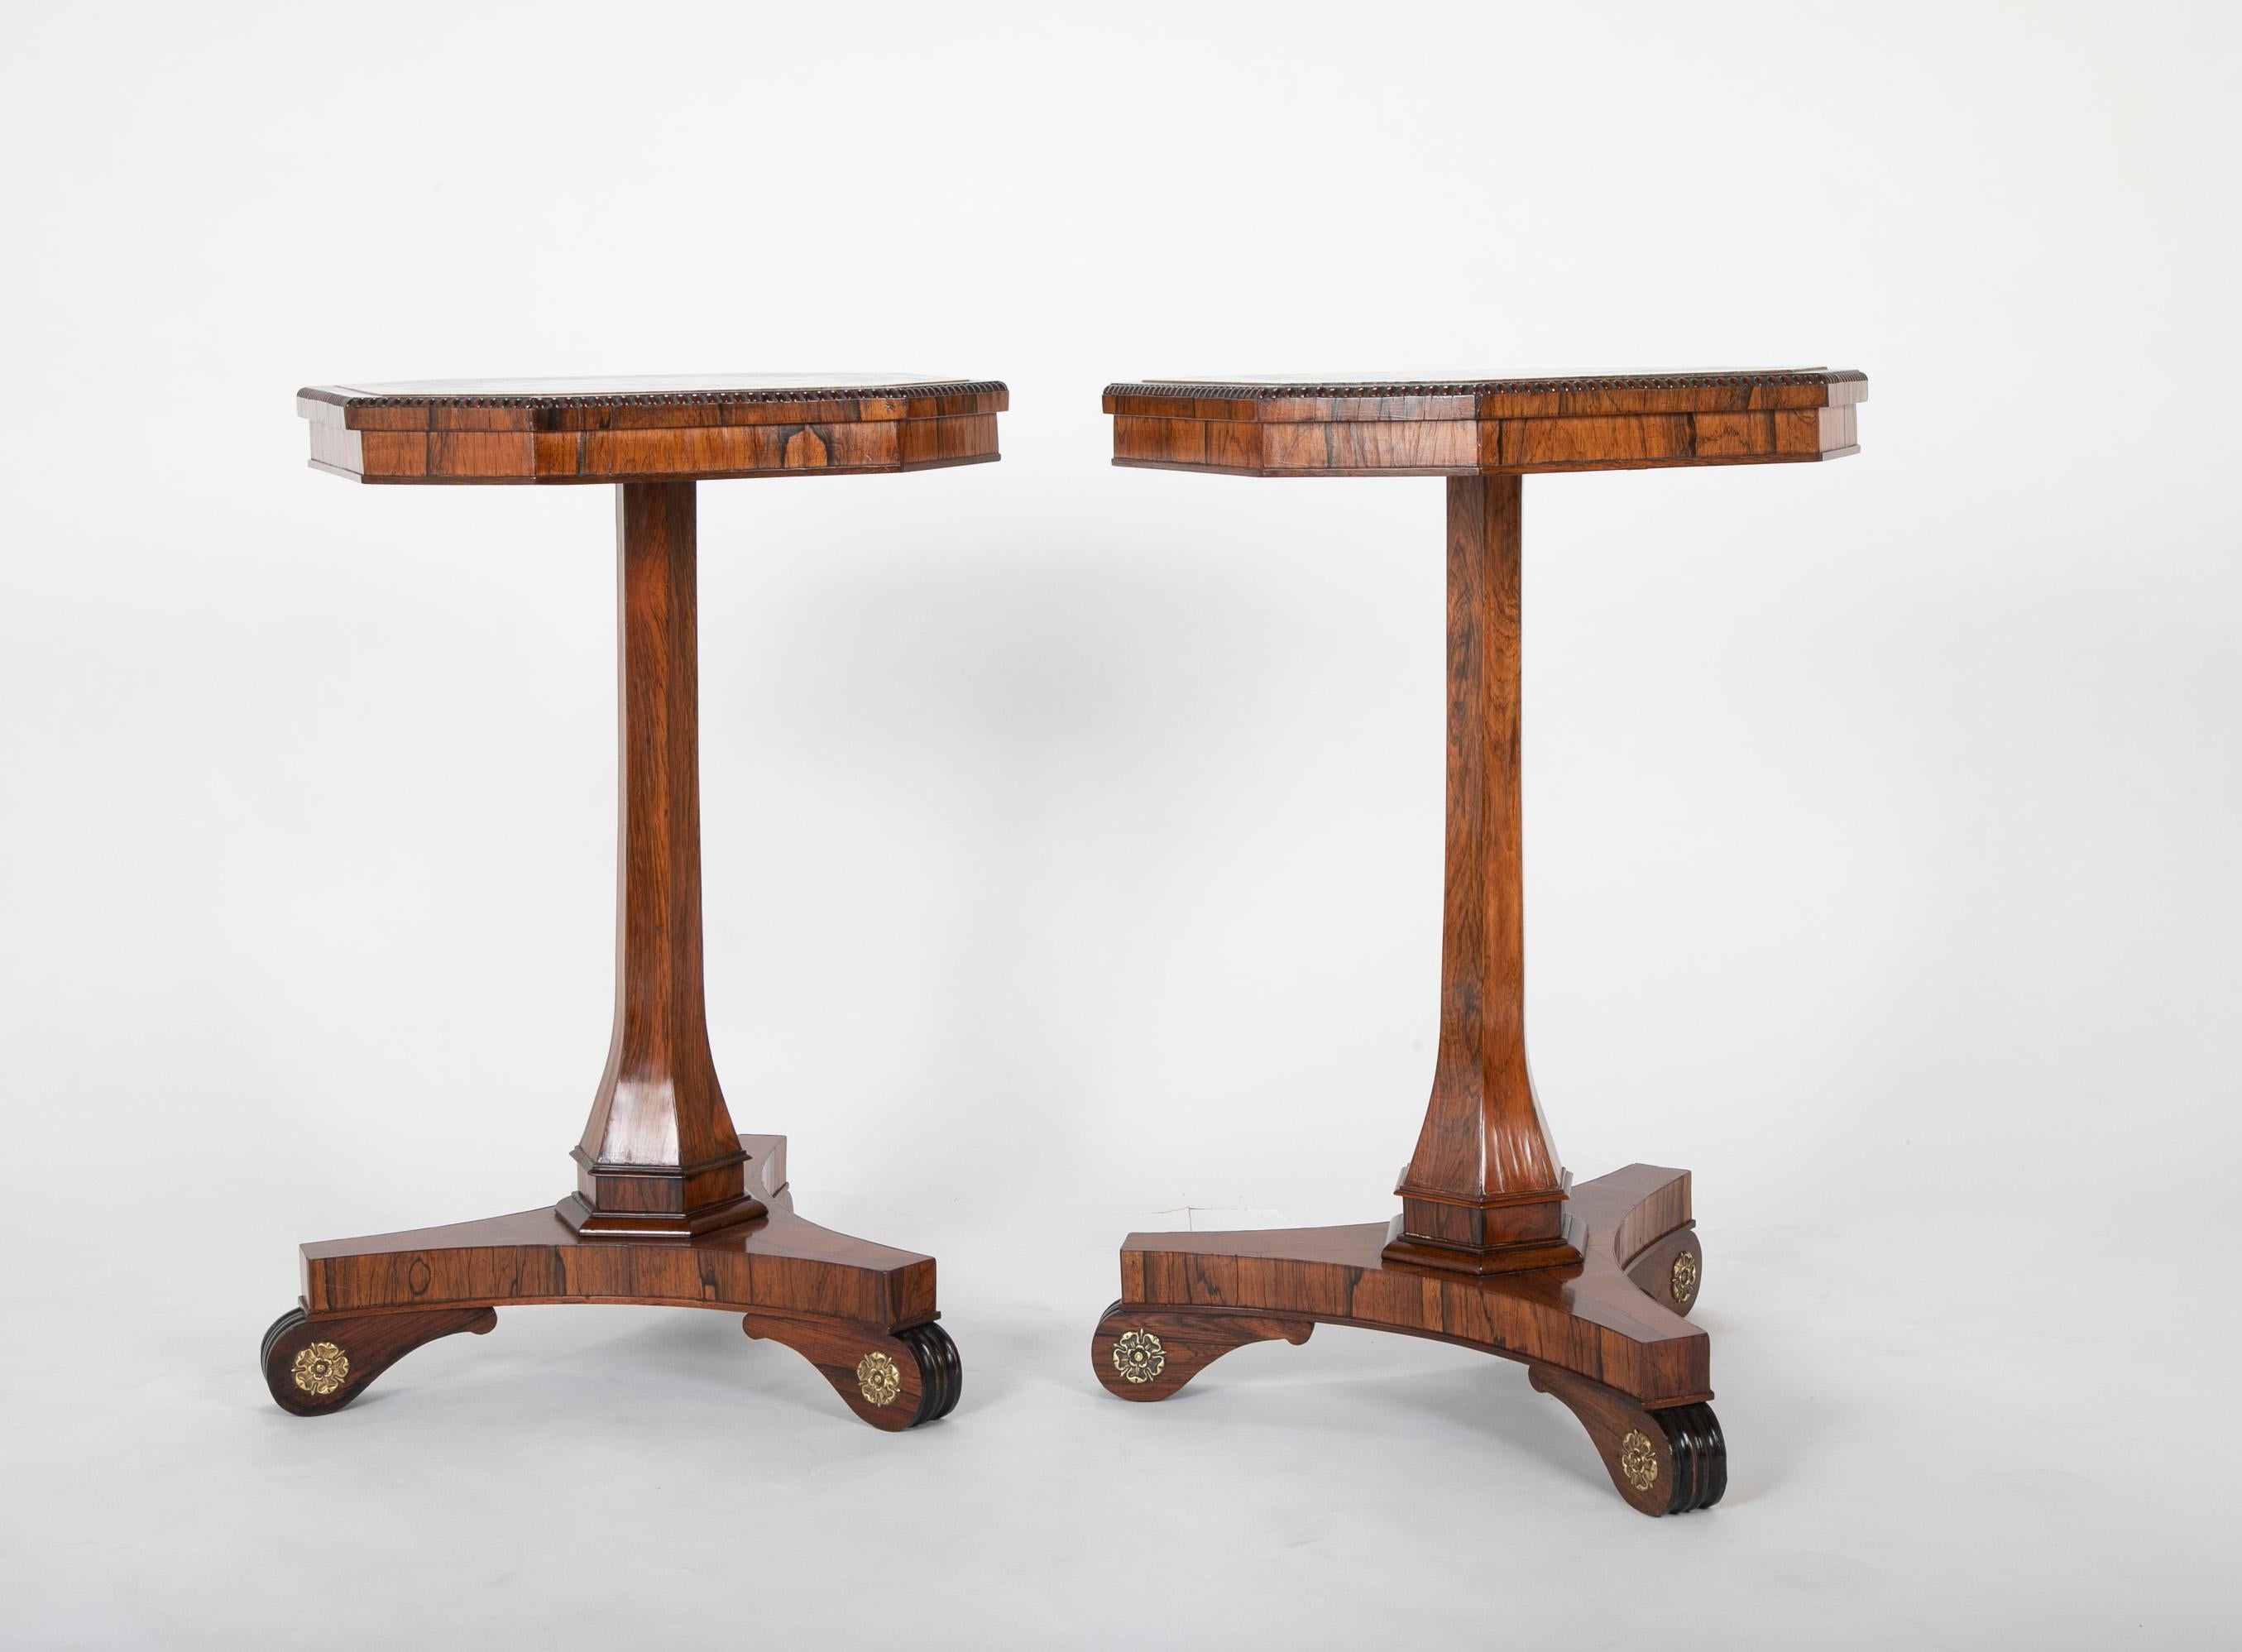 Pair of Georgian rosewood & specimen marble occasional tables. Each with a gridded selection of specimen marbles inset in the octagonal top with gadrooned edge raised on a flaring hexagonal stem, the tripartite plinth on scrolled feet having bronze